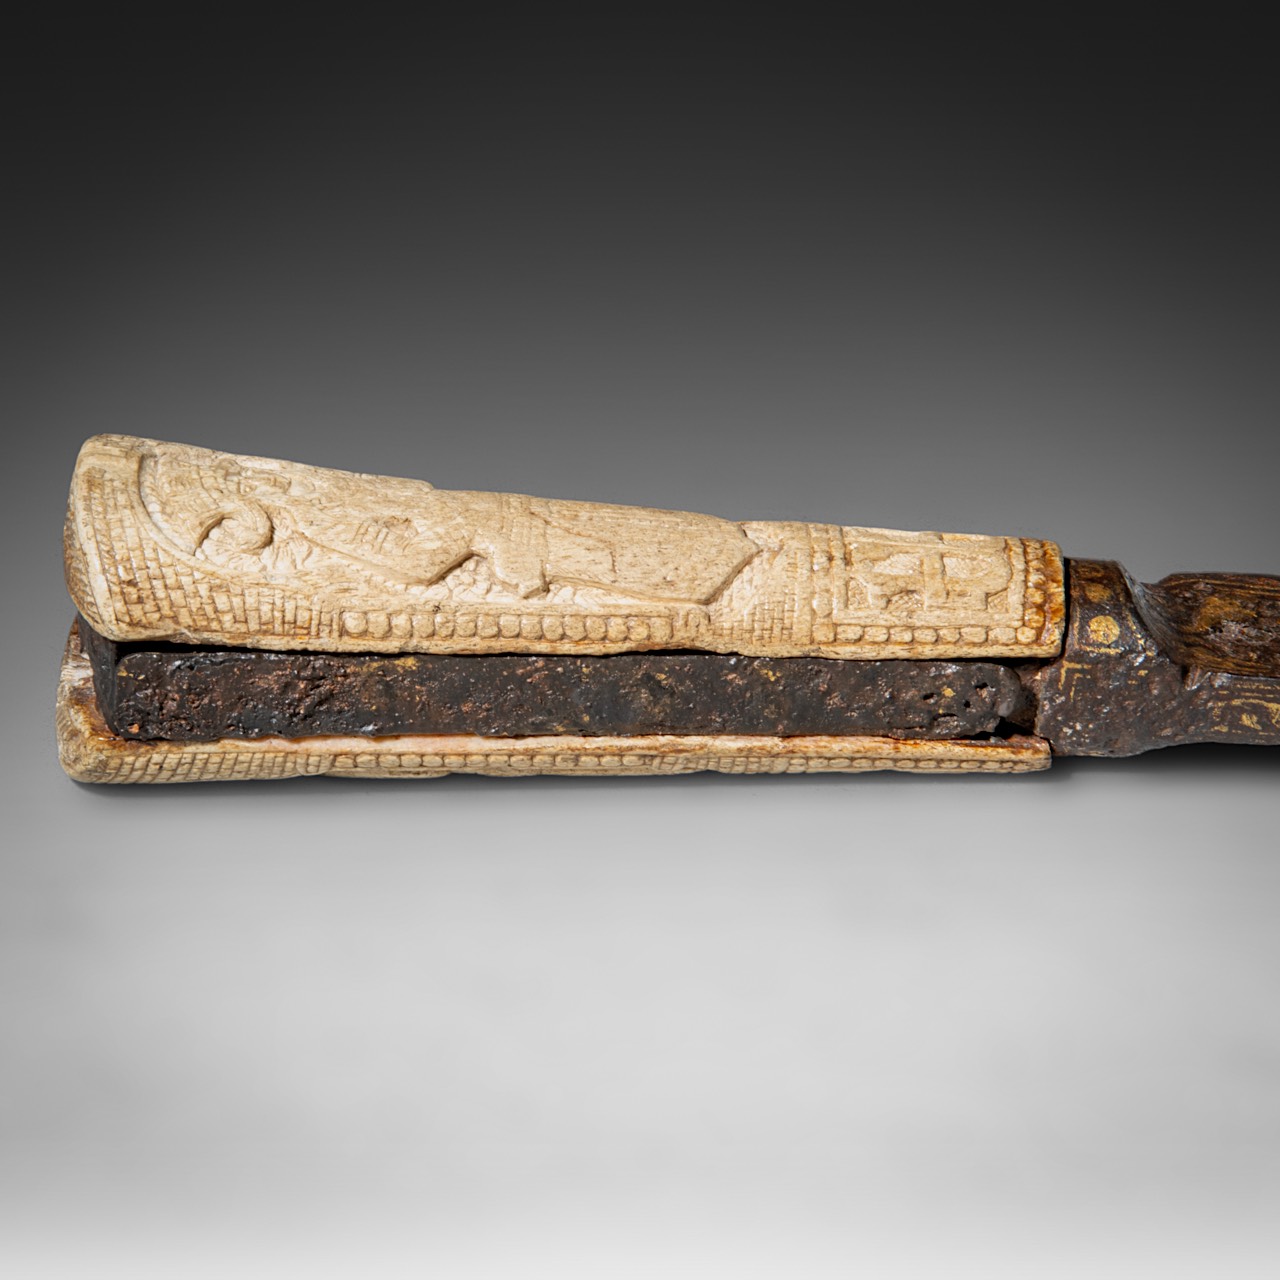 A rare, probably Byzantine dagger with a relief-cut bone handle, 12th/13thC, total L 36 cm - Image 10 of 10